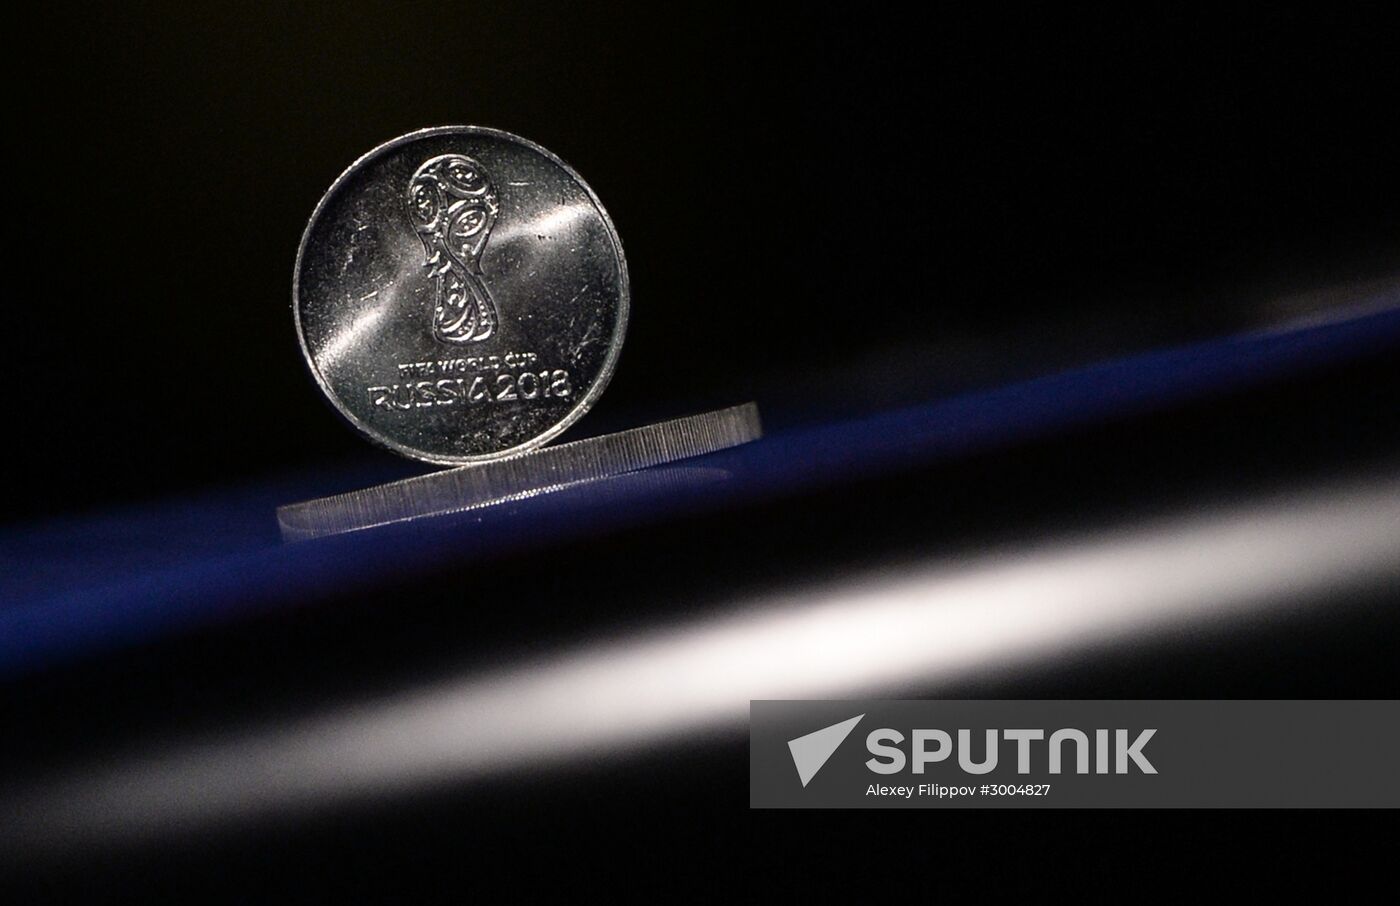 Russian Central Bank issues commemorative coins for Confederations Cup and 2018 FIFA World Cup